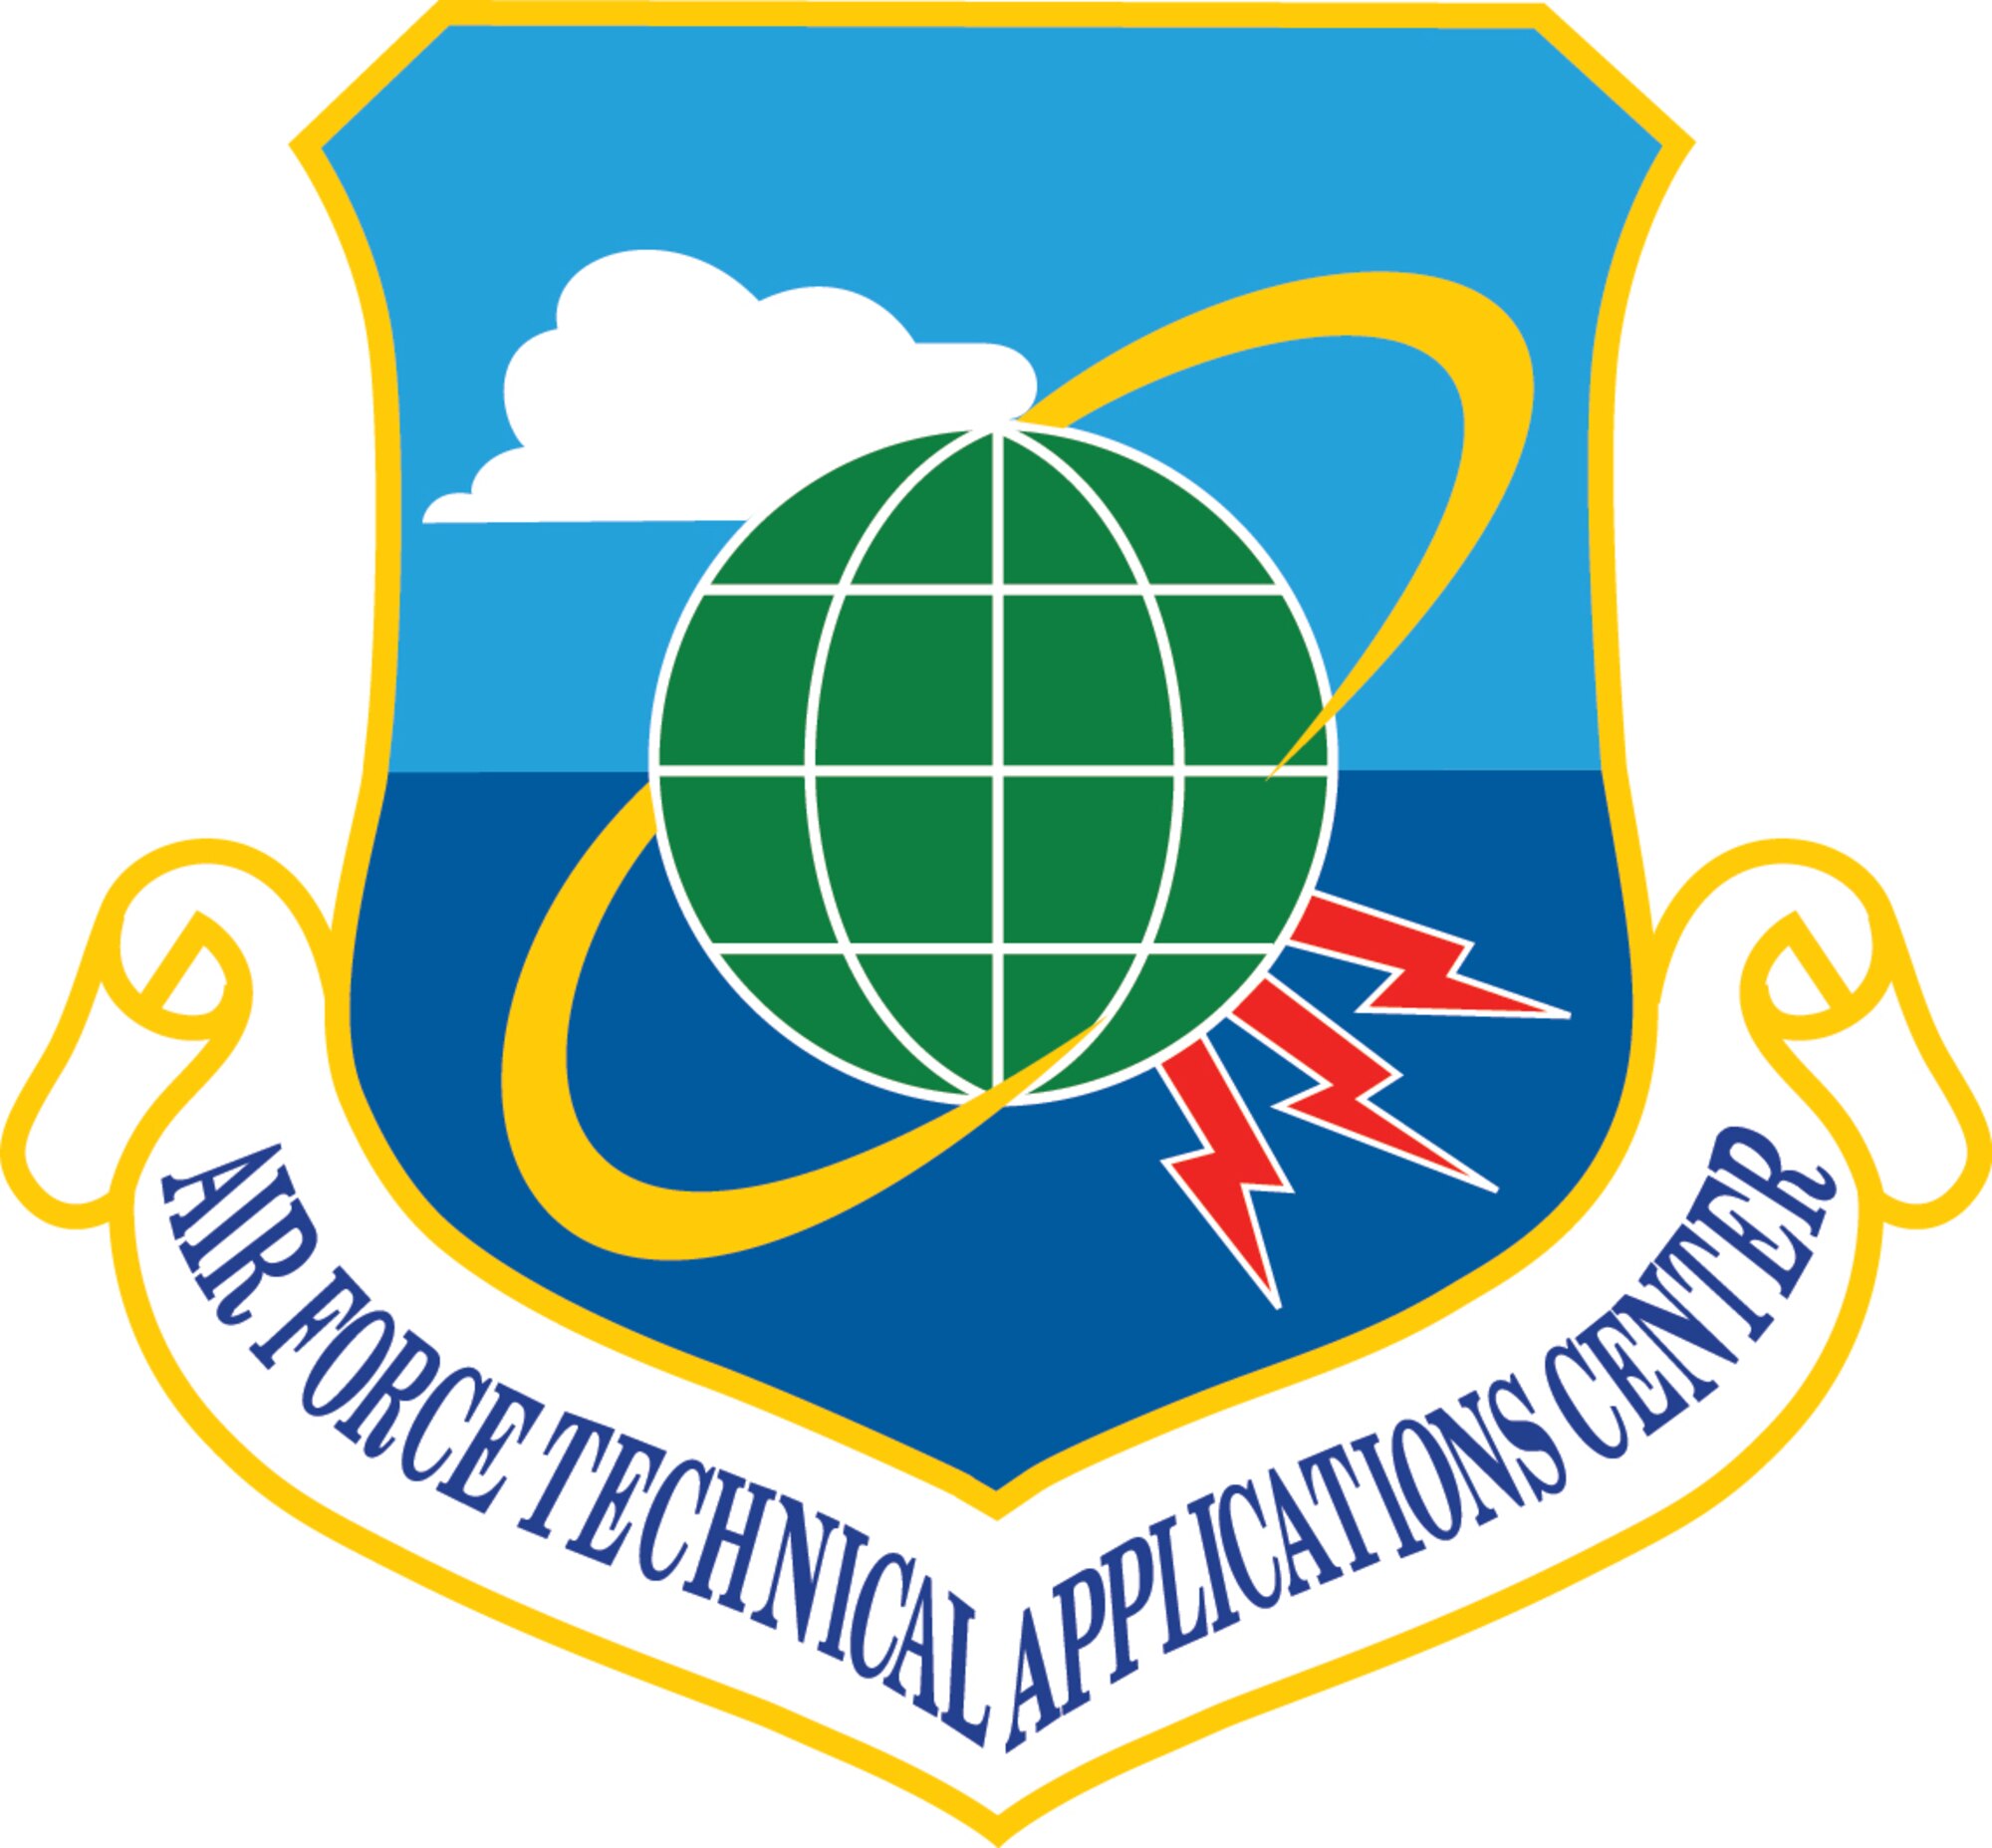 Official shield of the Air Force Technical Applications Center